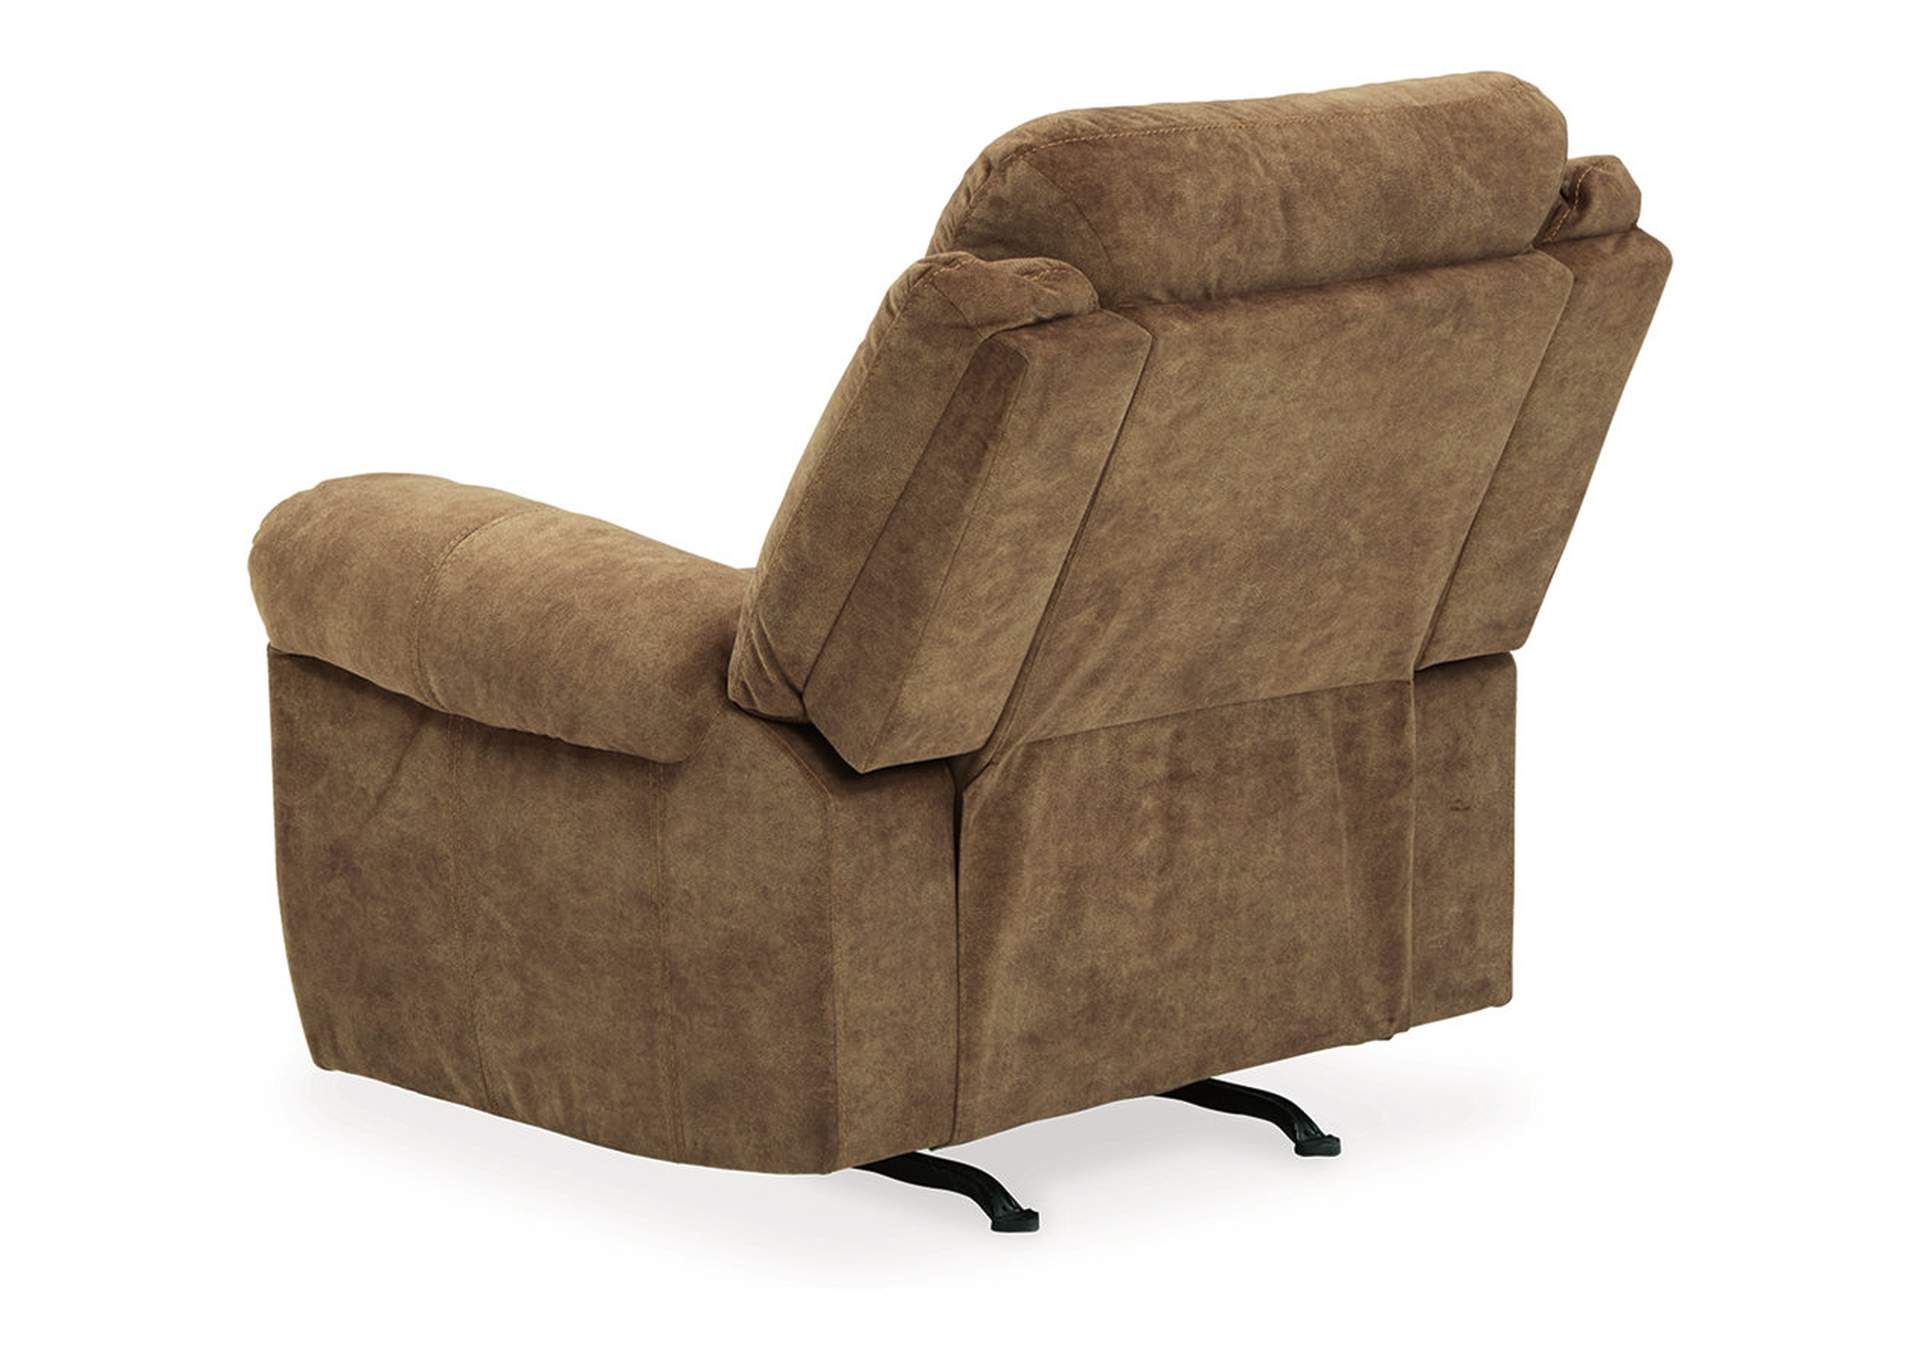 Huddle-Up Recliner,Signature Design By Ashley